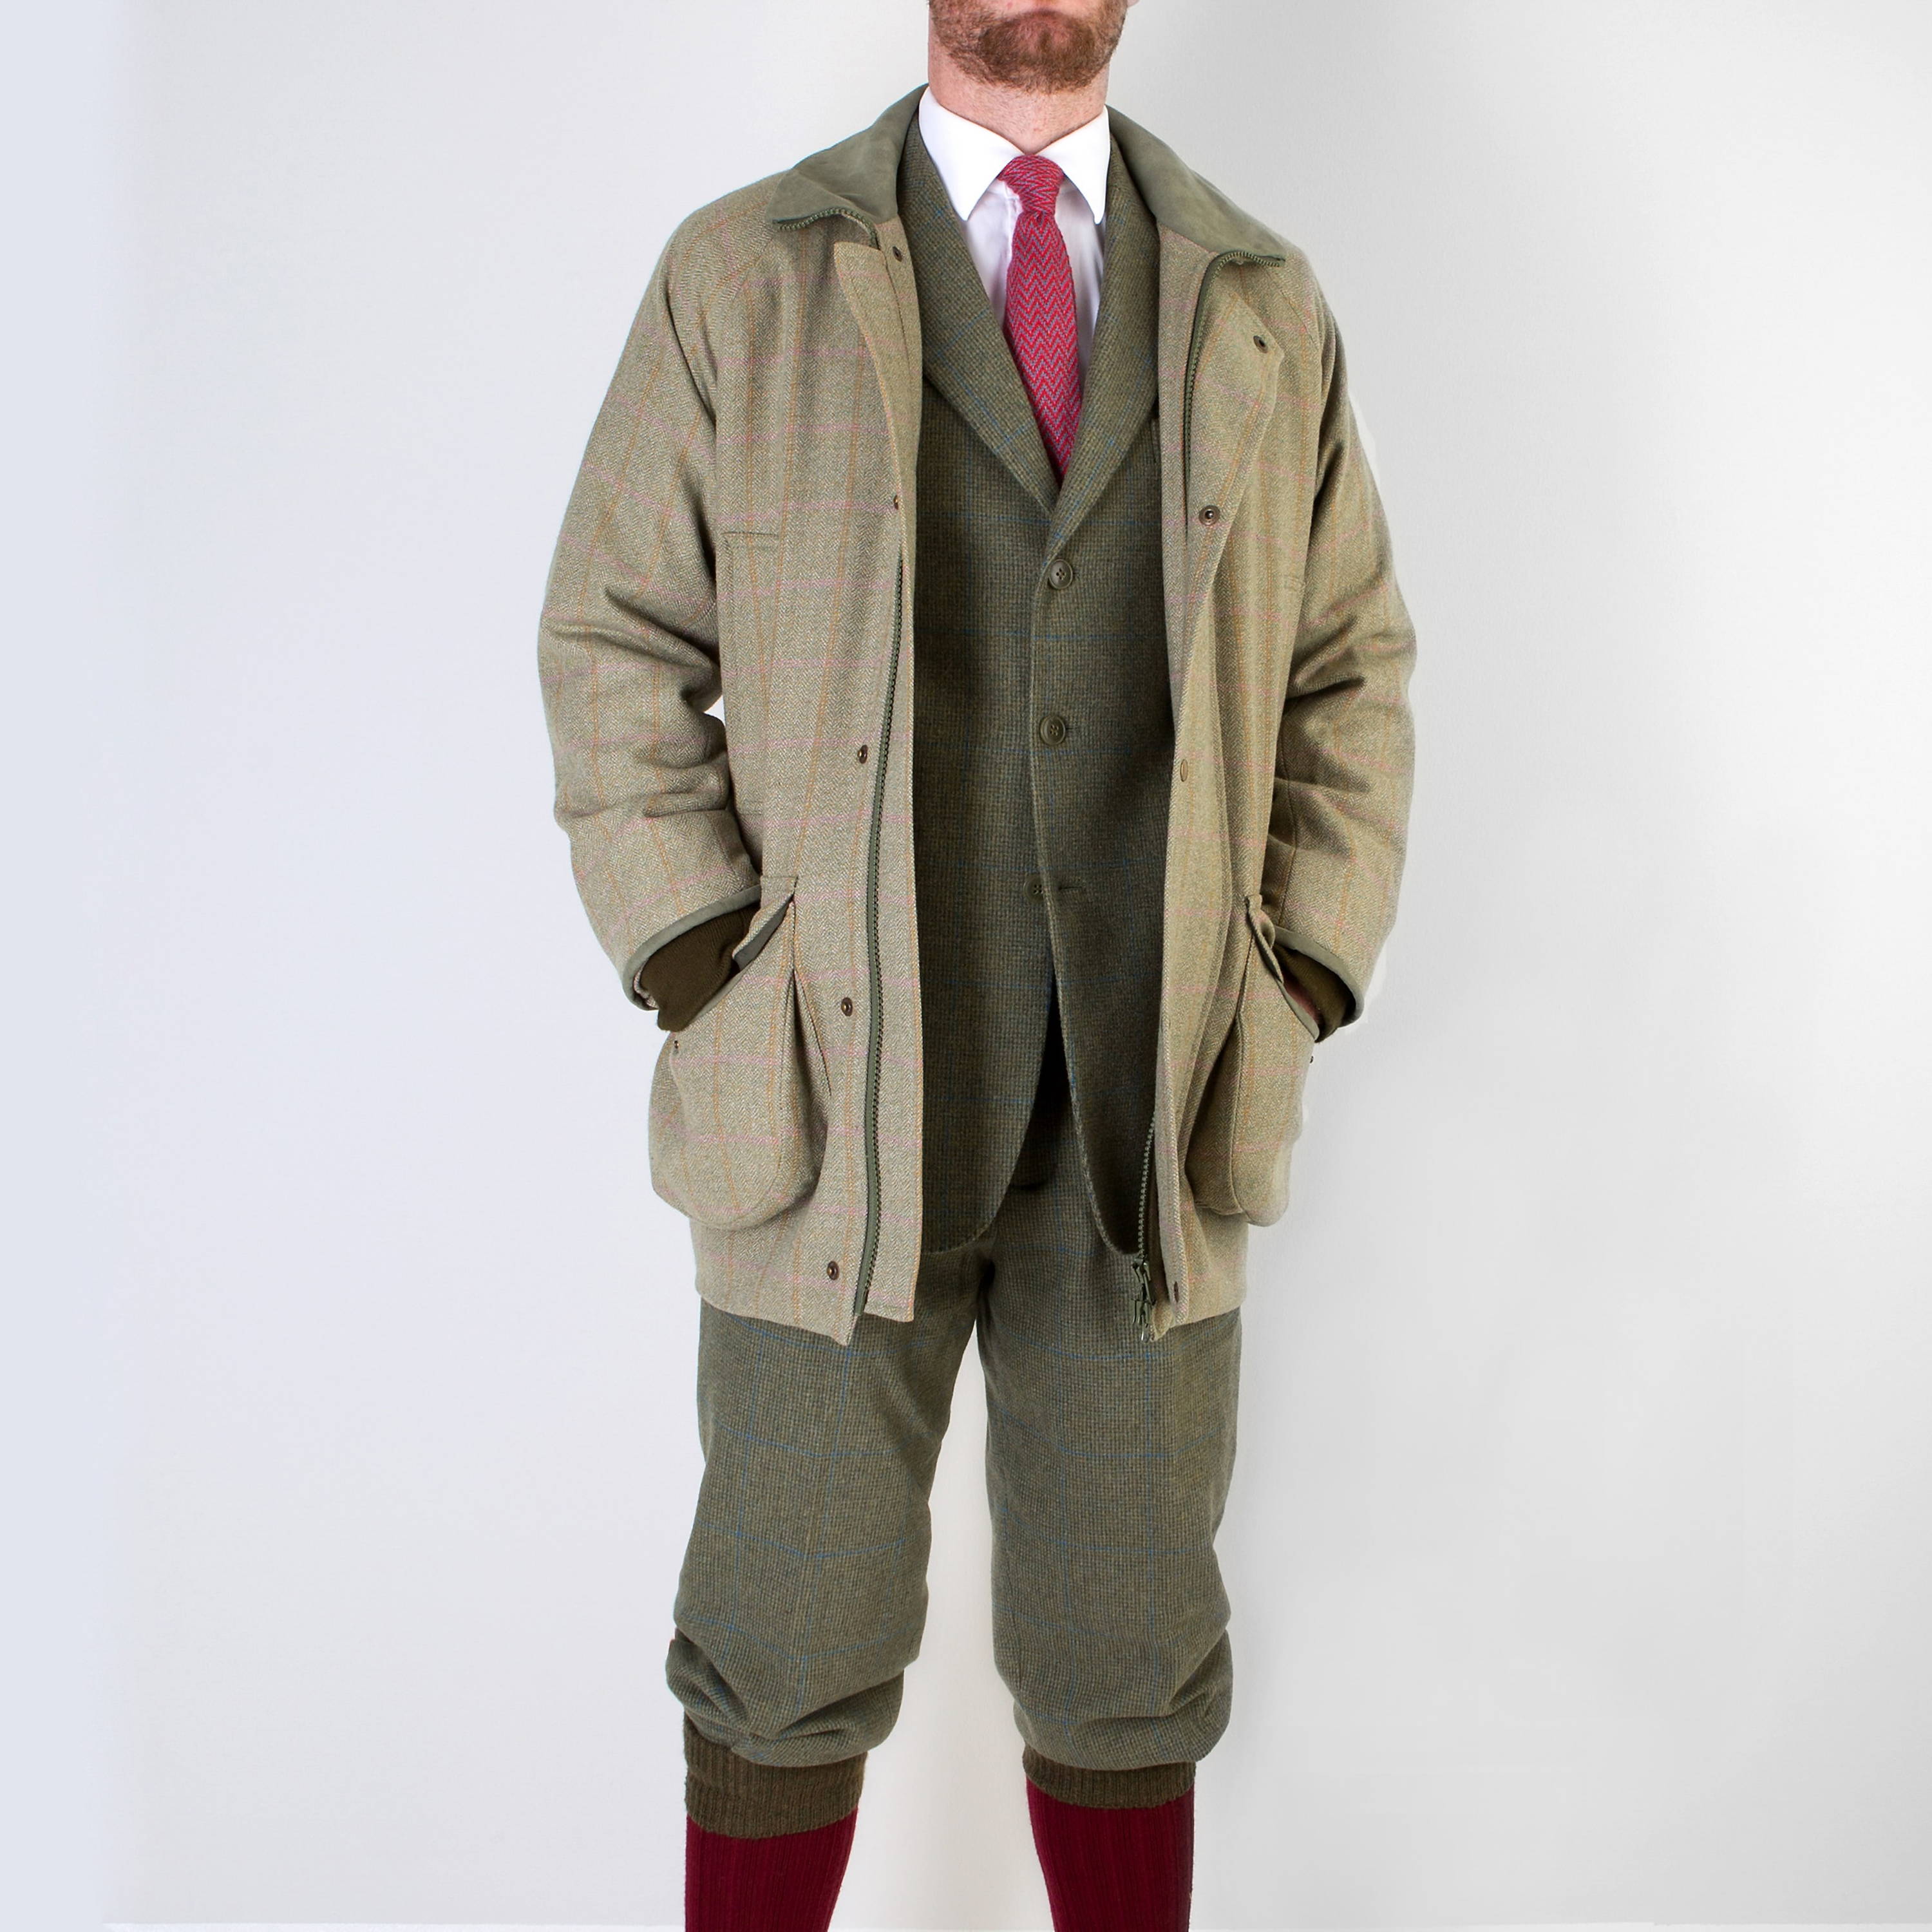 Man wearing shooting clothing with field coat, breeks and tweed jacket by Mullen and Mullen bespoke tailoring